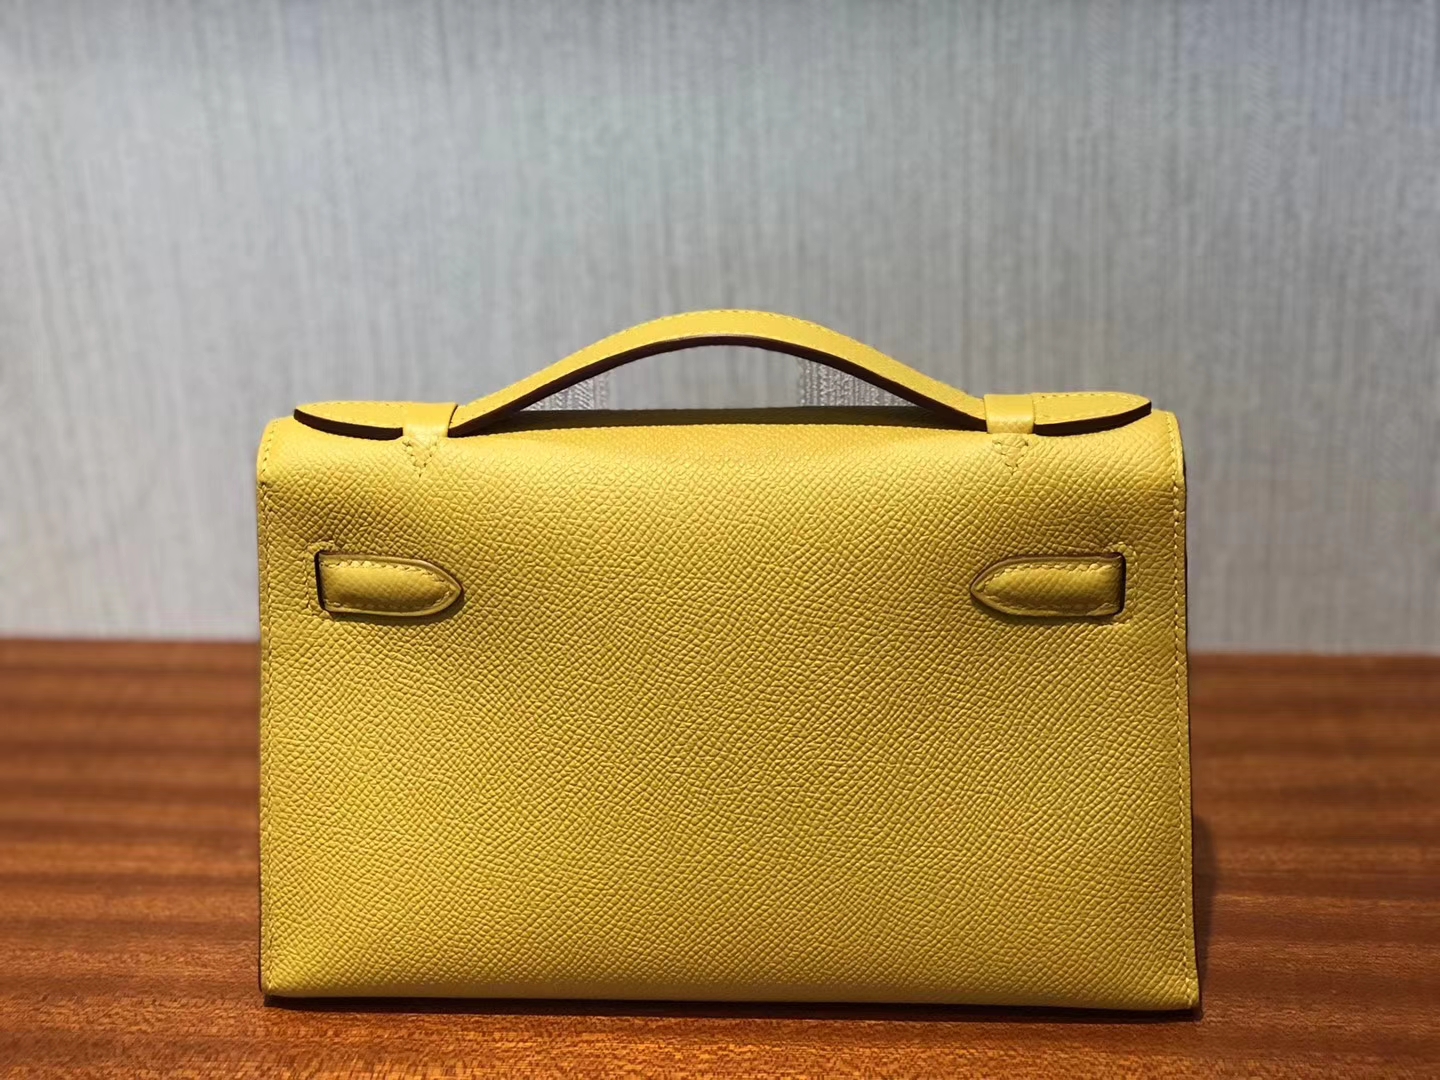 Discount Hermes 9D Ambre Yellow Epsom Calf Minikelly Clutch Bag22CM Gold Hardware